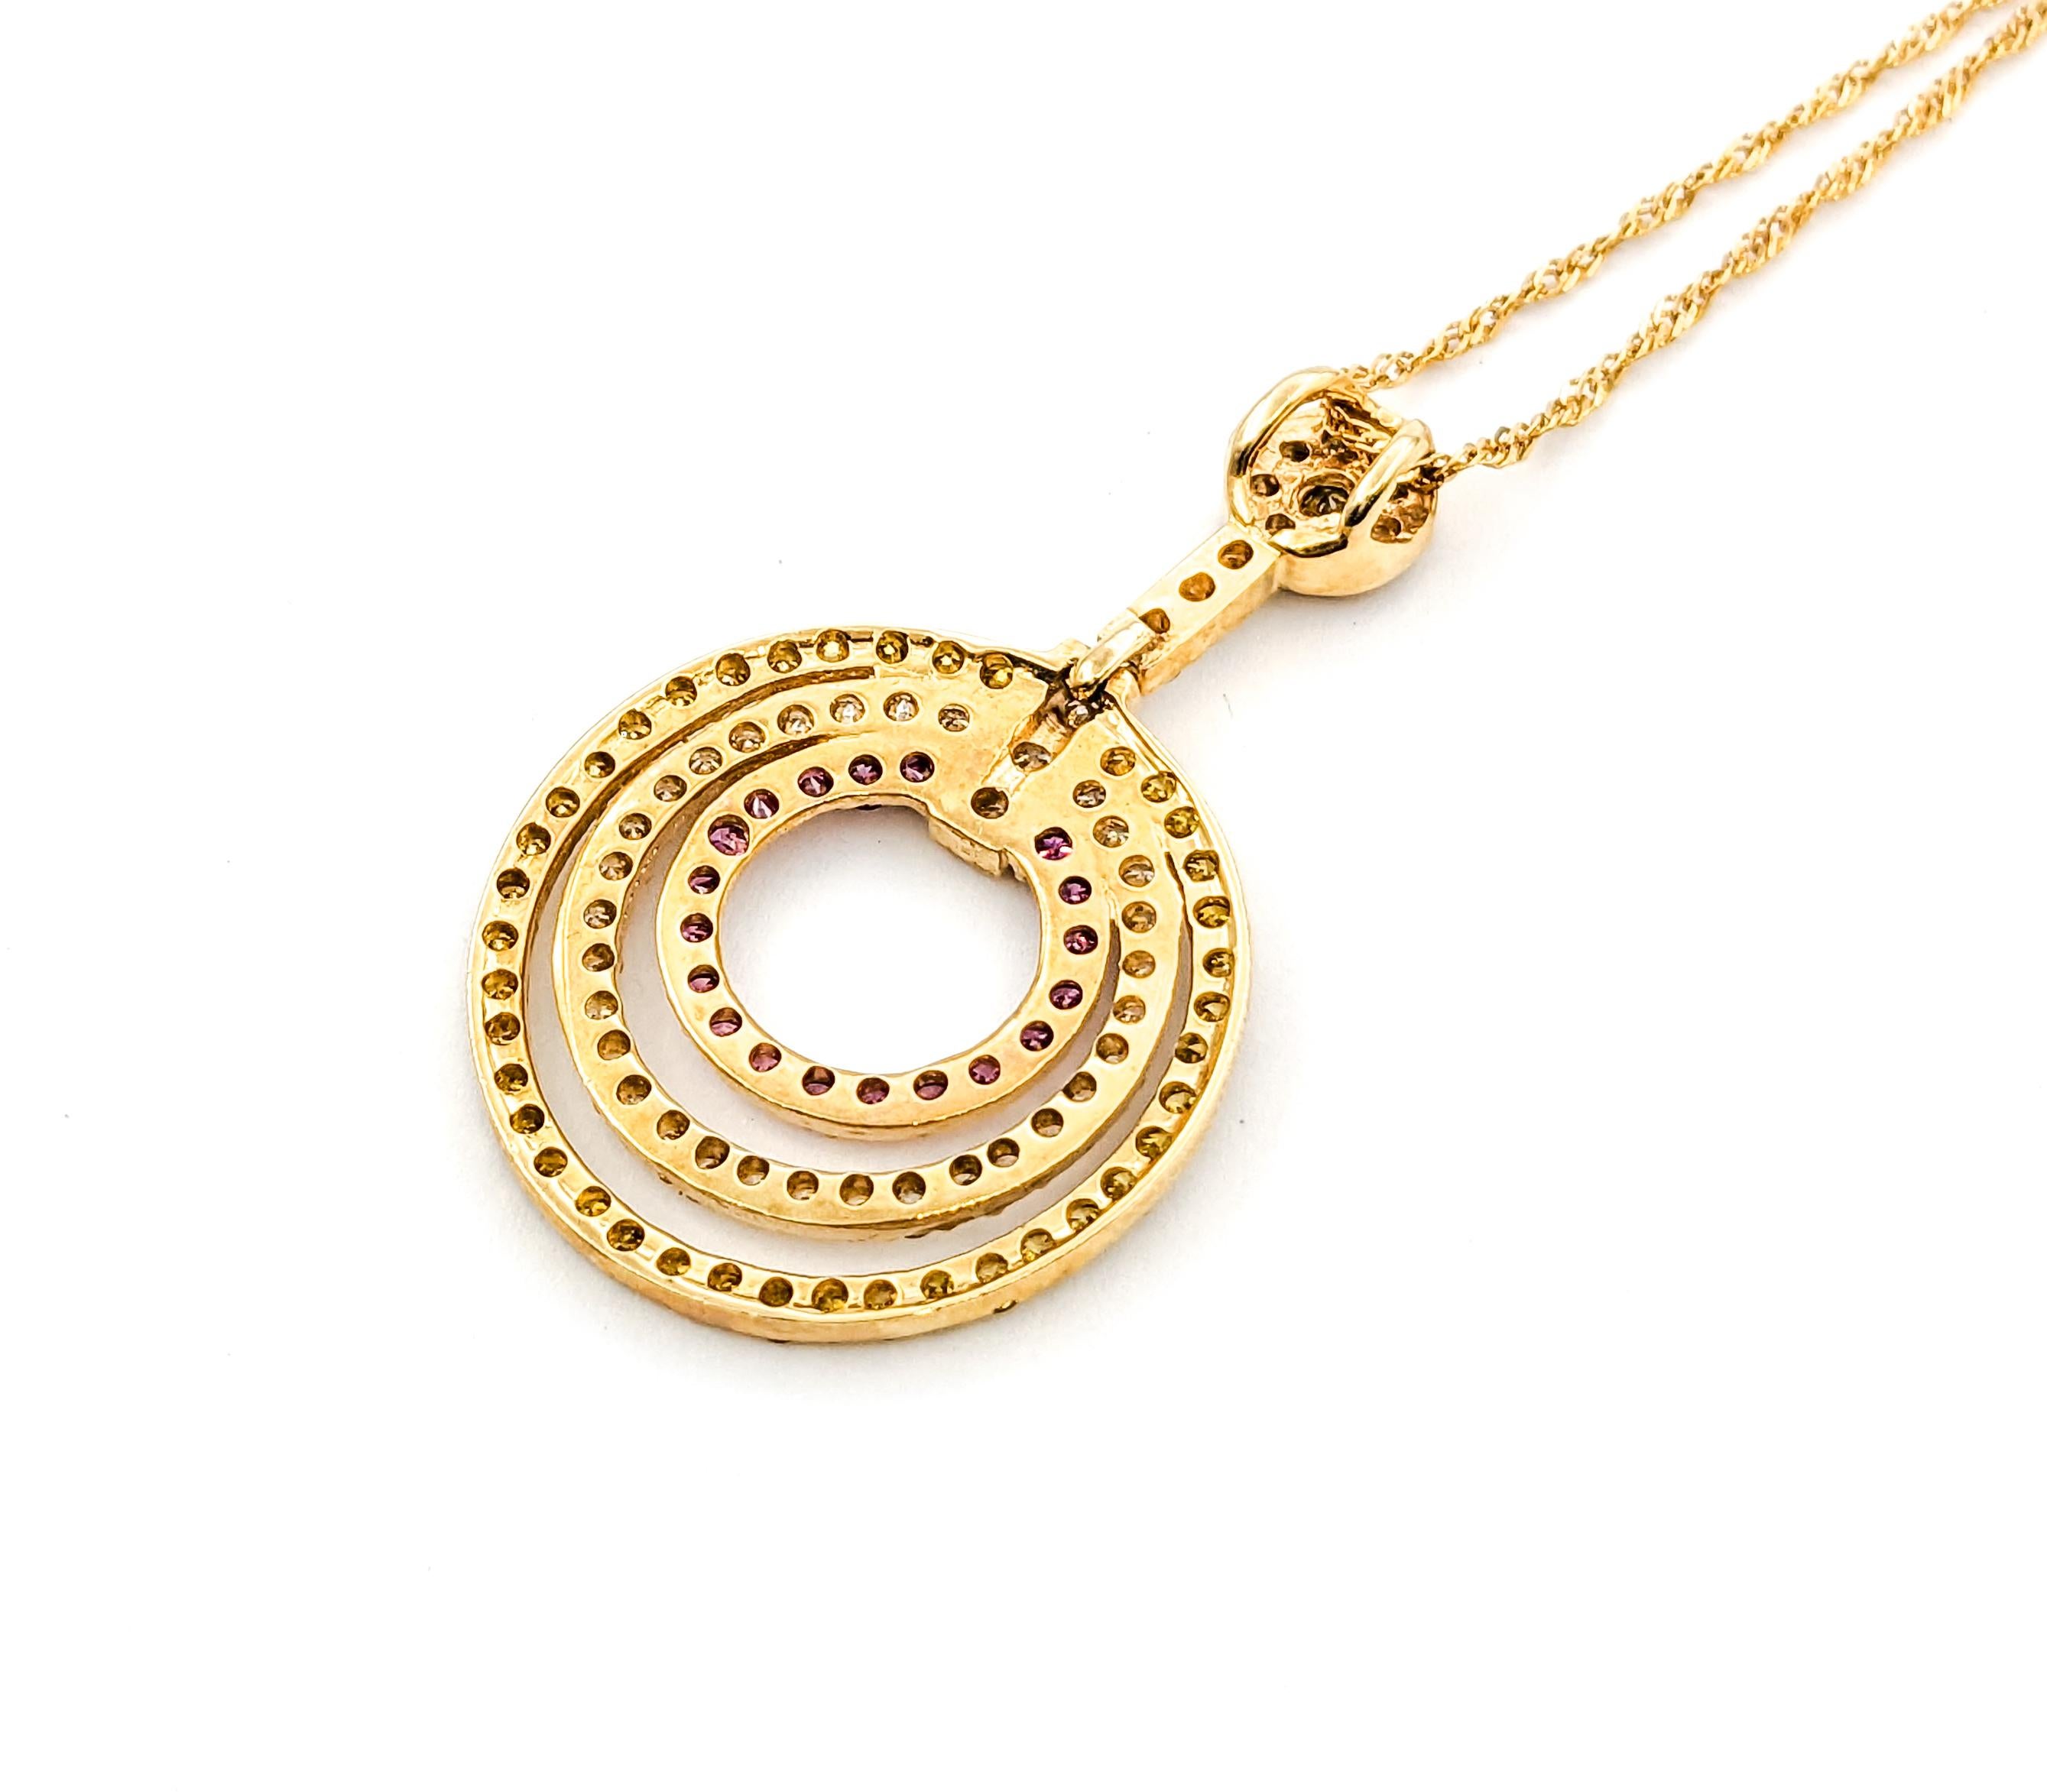 1.83ctw Diamond Concentric Circle Pendant Necklace in Yellow Gold In Excellent Condition For Sale In Bloomington, MN